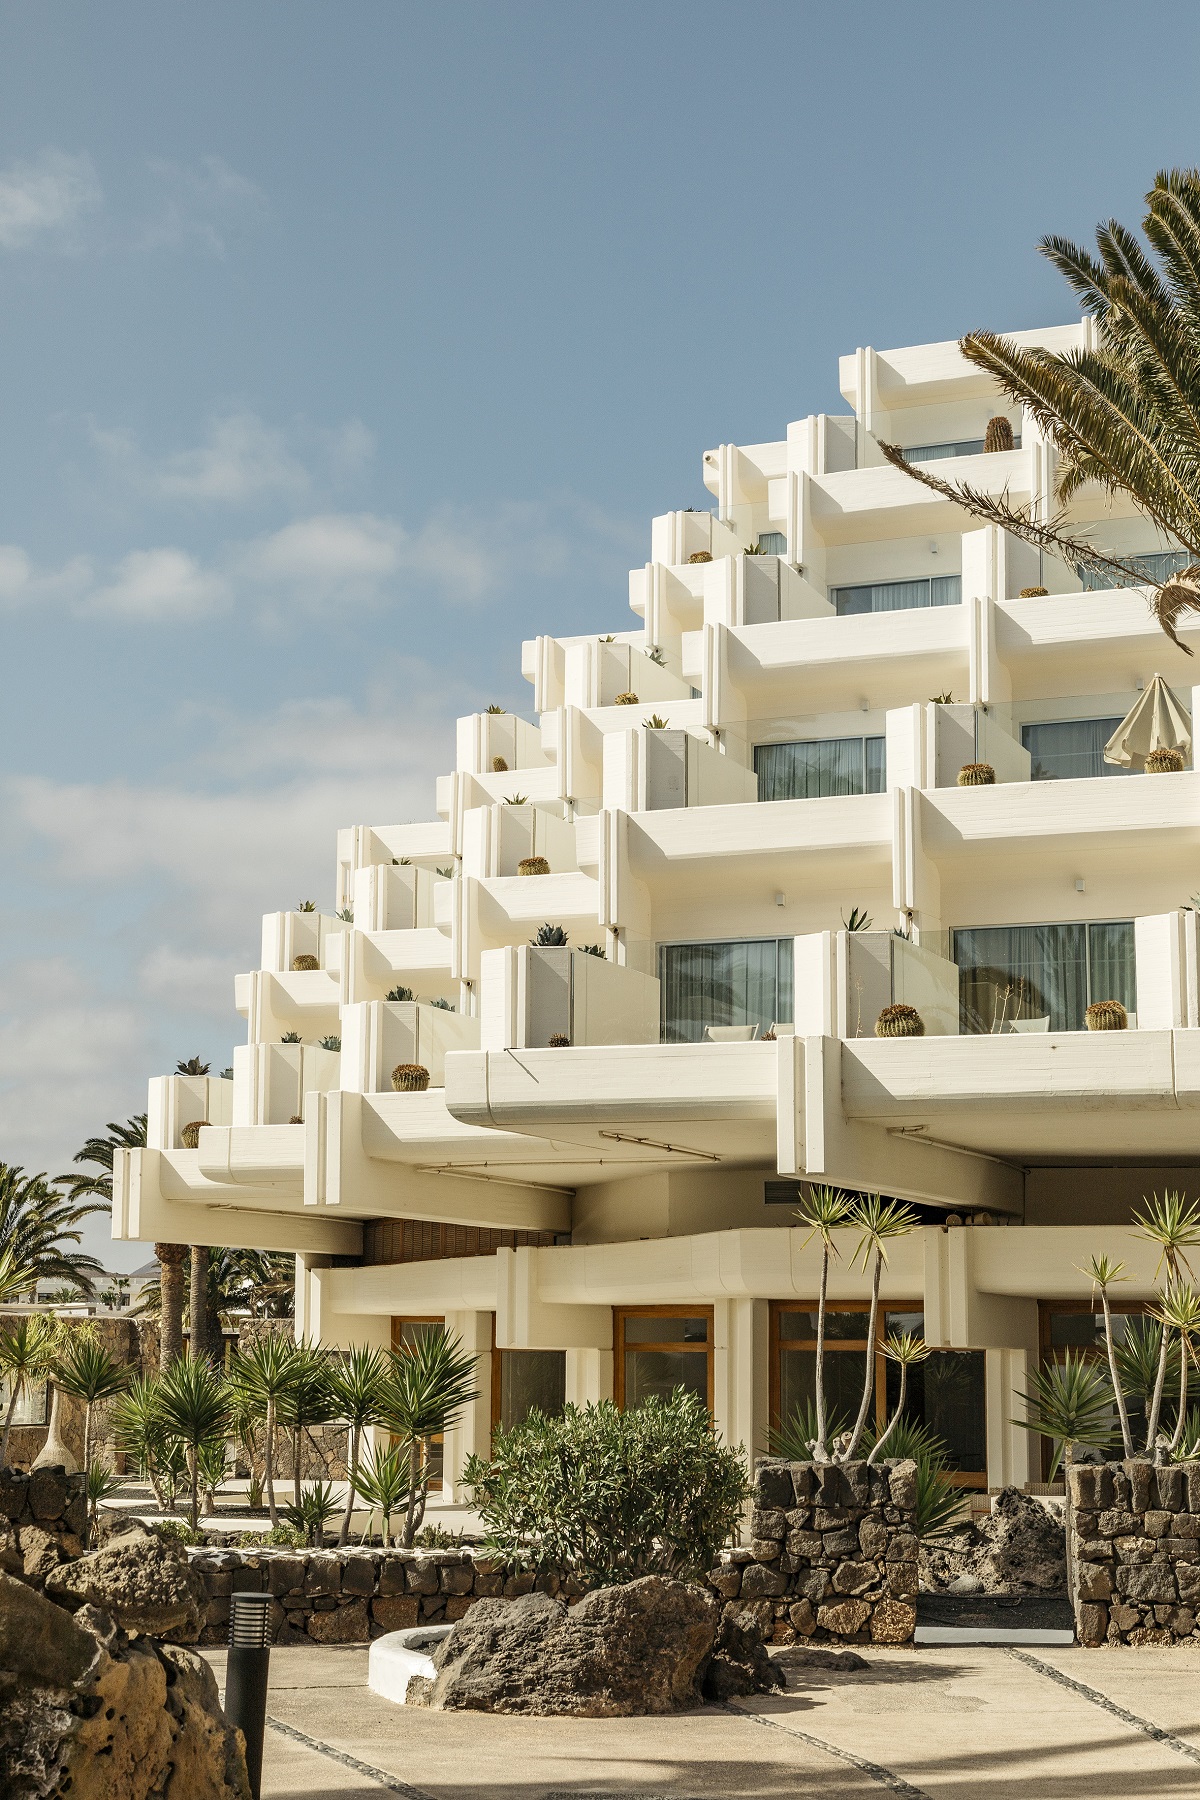 tiered hotel exterior designed by rationalist architect Fernando Higueras